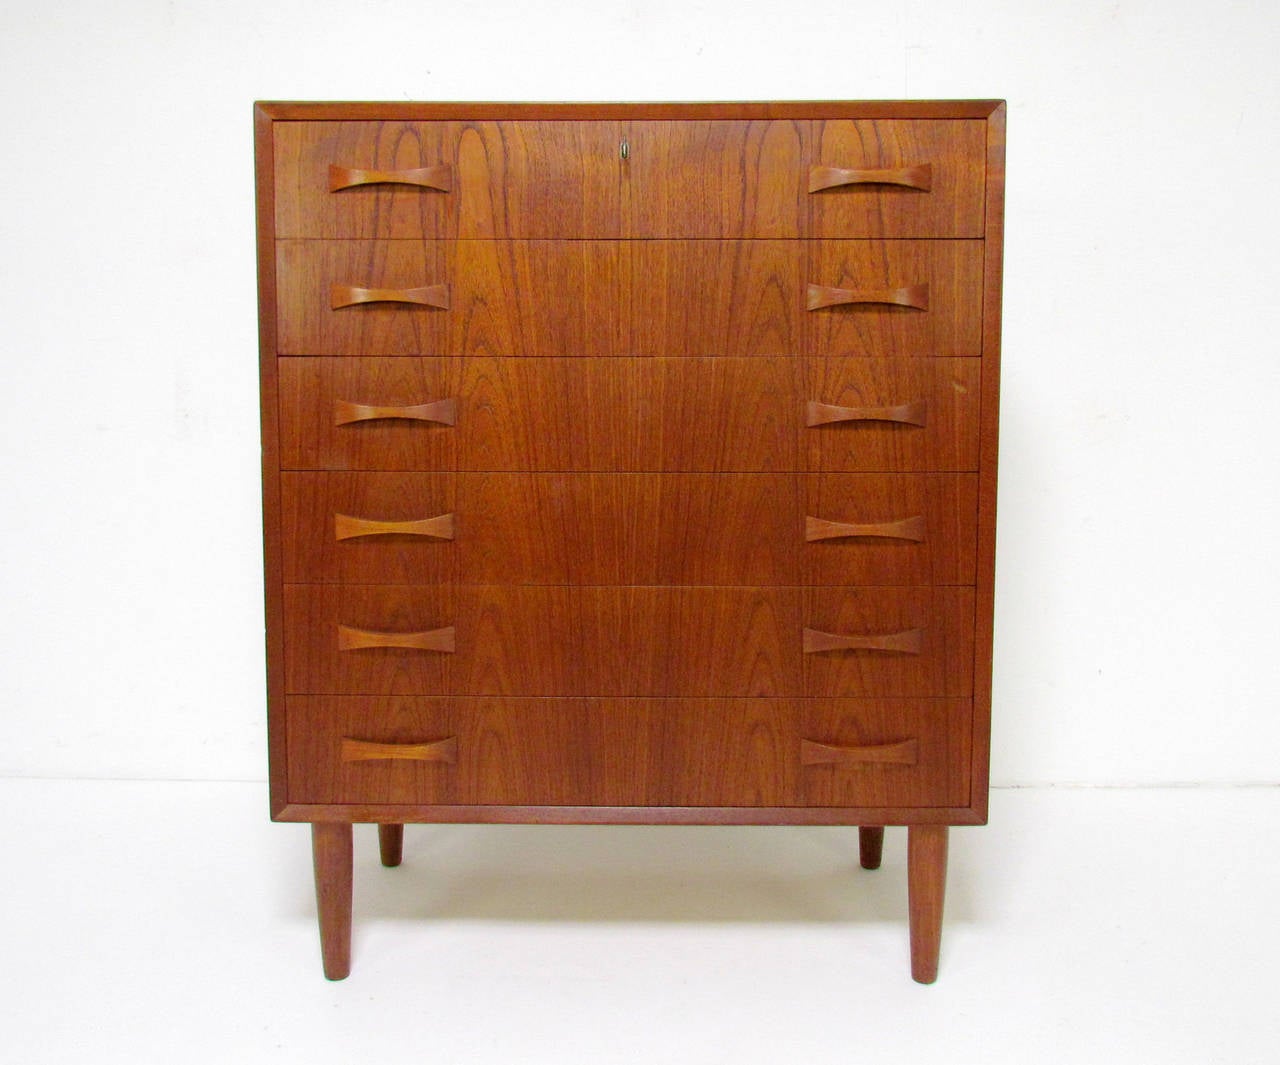 Danish teak chest of drawers with outset bowtie pulls. Includes key for top drawer lock.